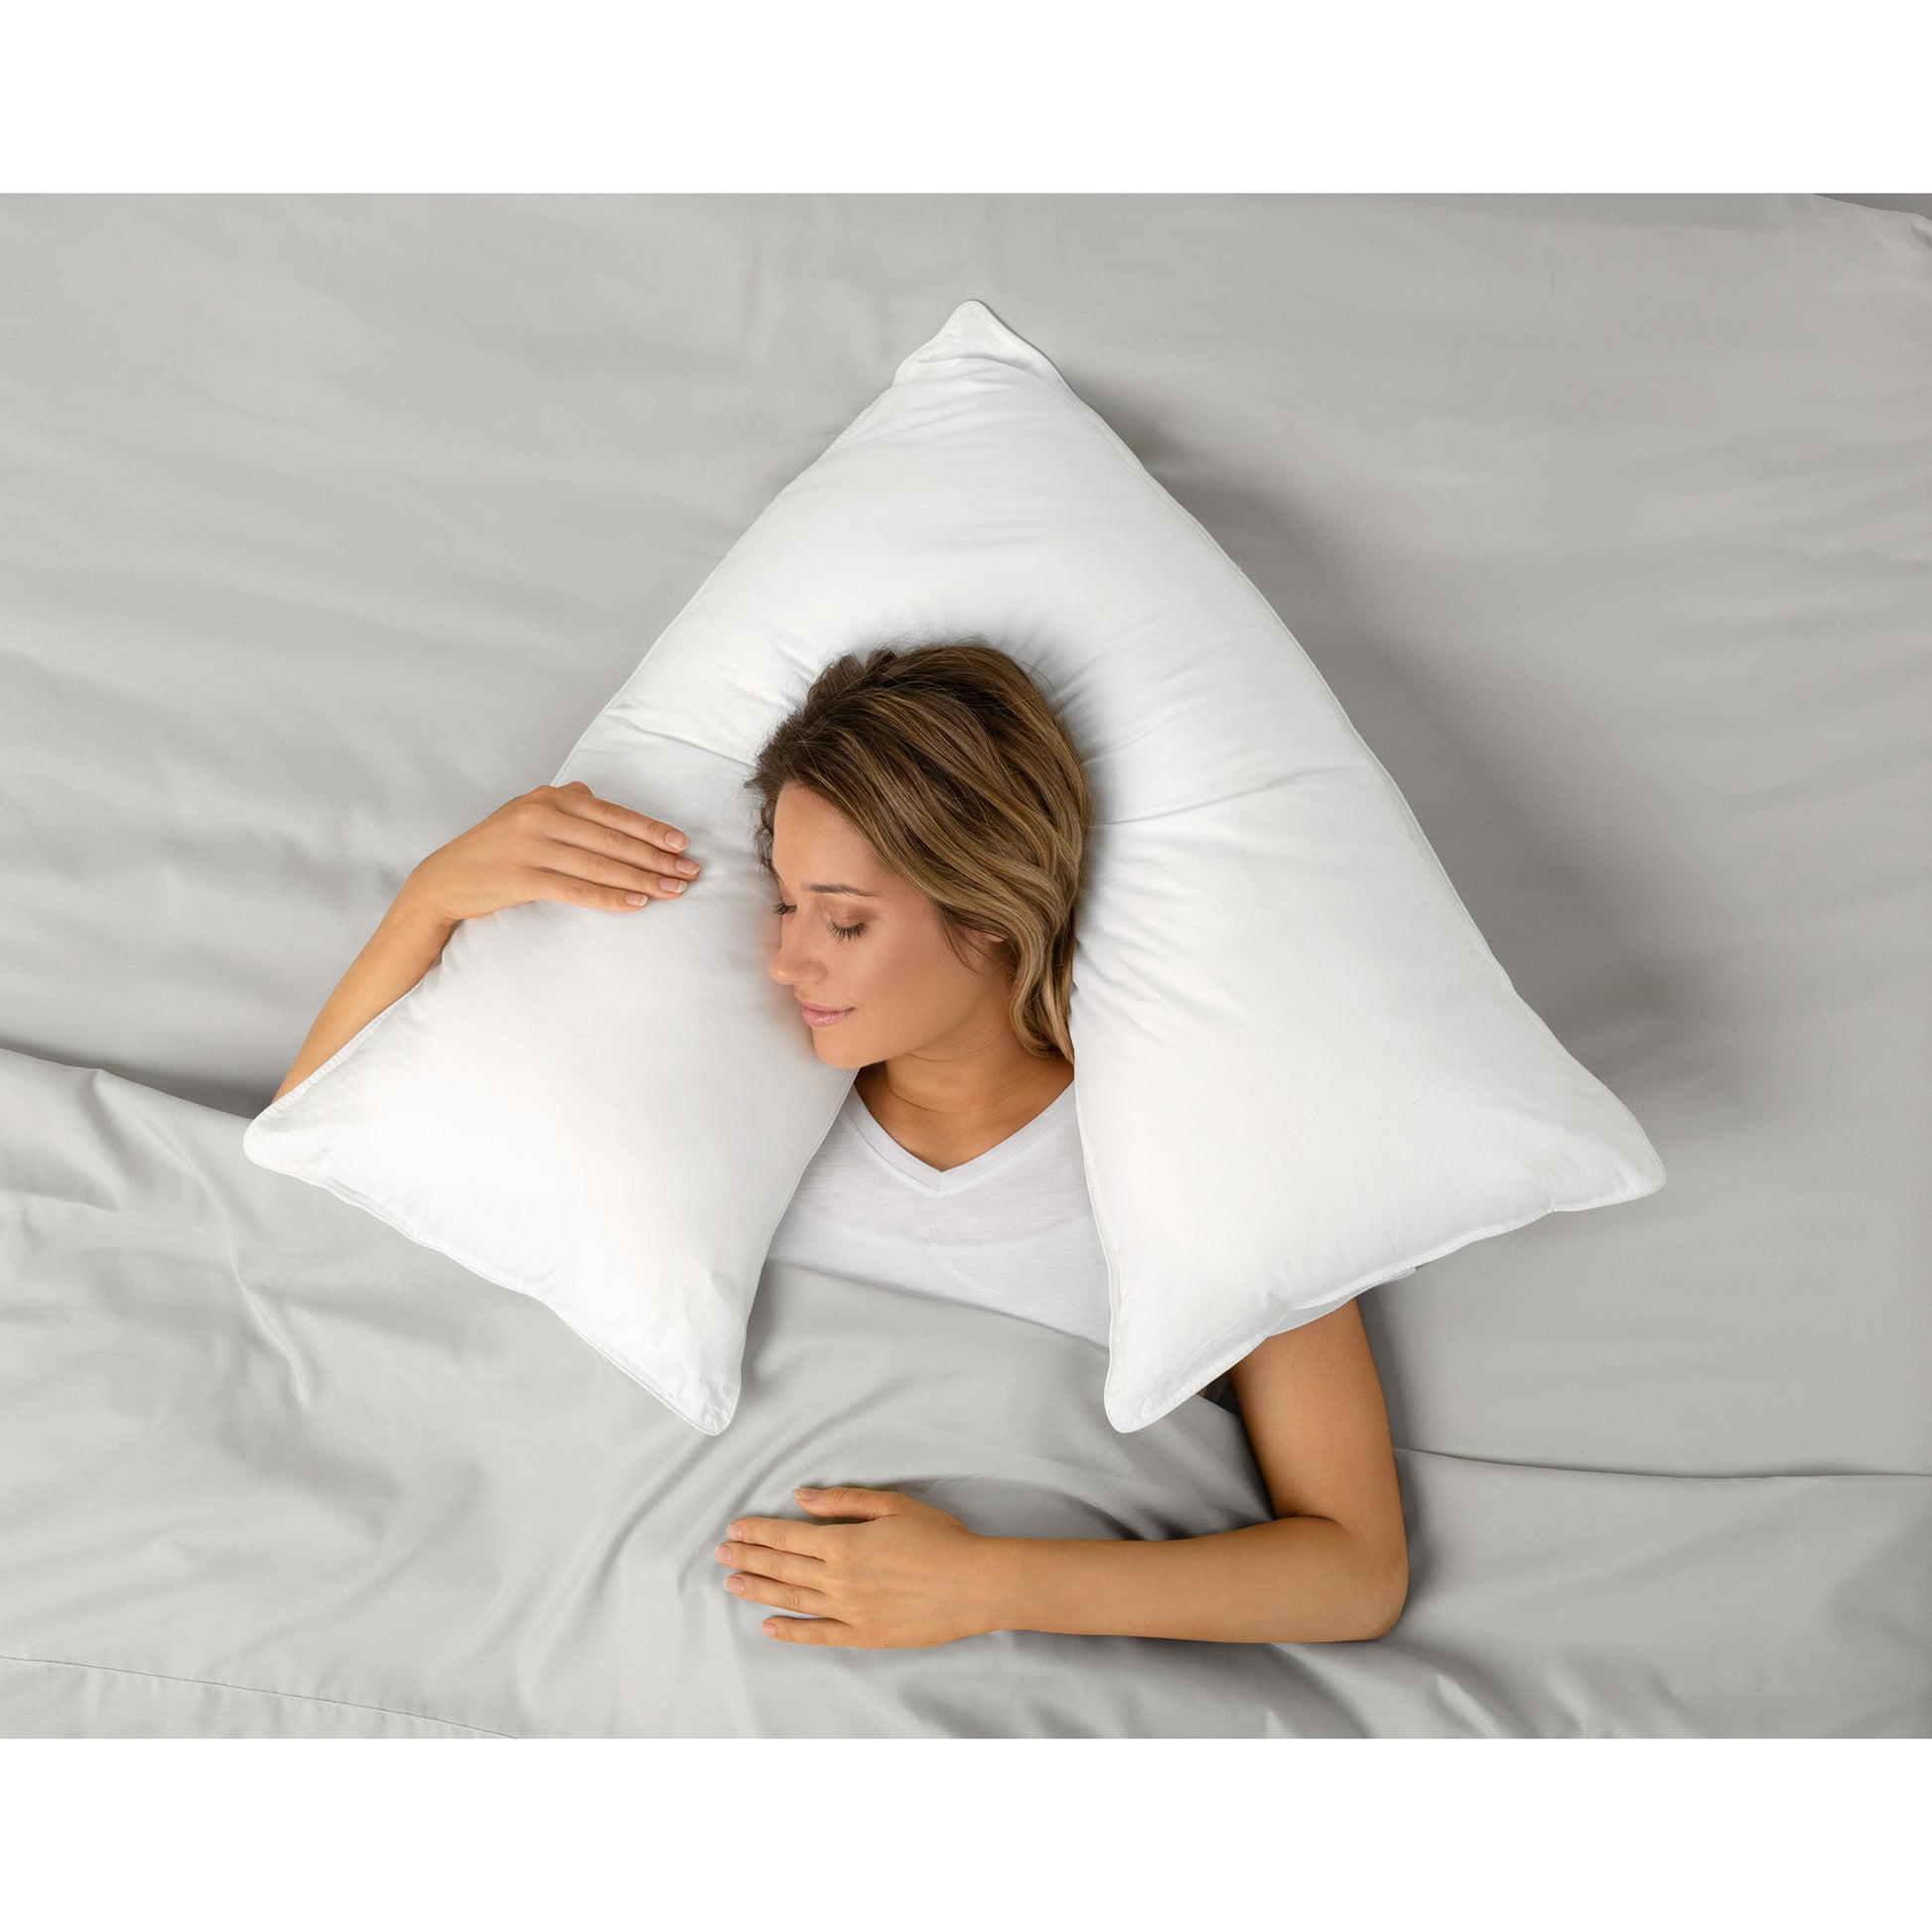 Woven V-Shape Hotel Collection Bed Pillow, Queen Size. Designed for Back, Stomach or Side Sleepers, 30x15x15, White, 100% Cotton